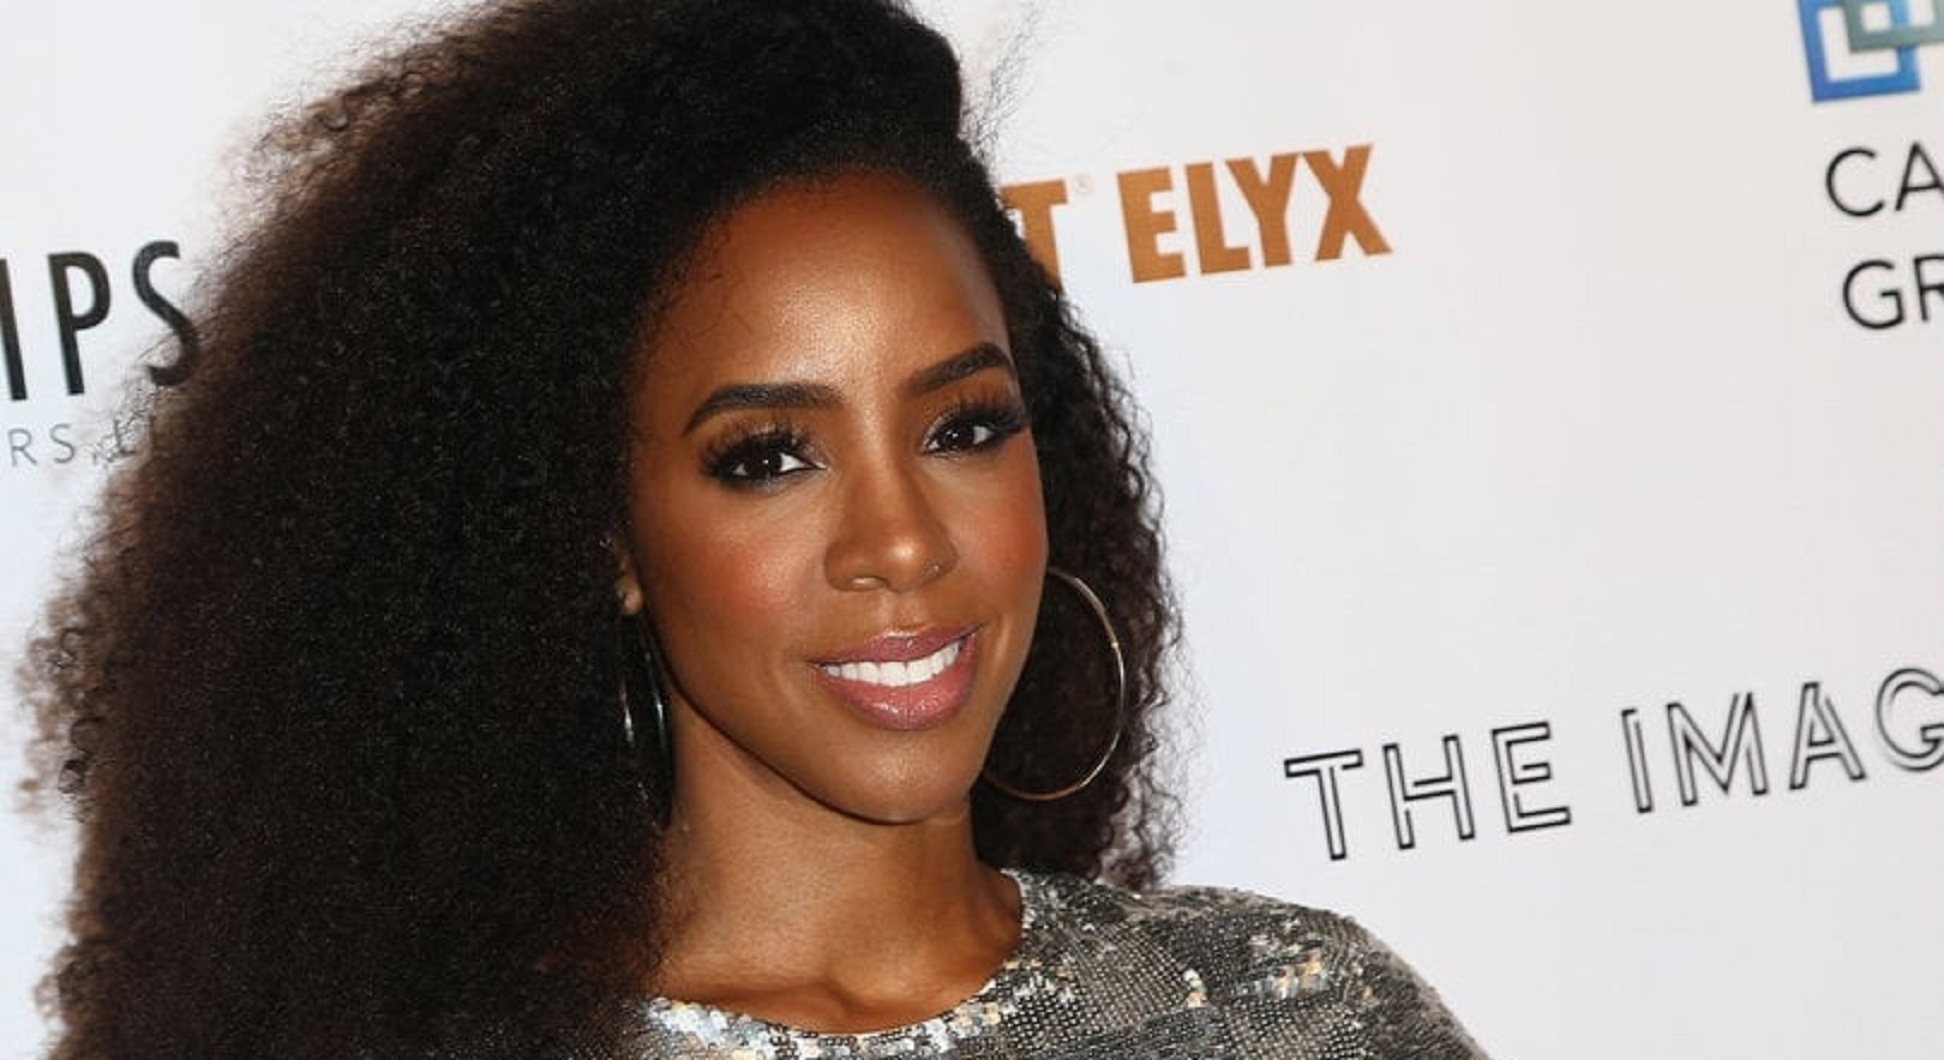 Kelly Rowland On Bleaching Allegations: “I’m Forever Chocolate, Proud to Be Chocolate”